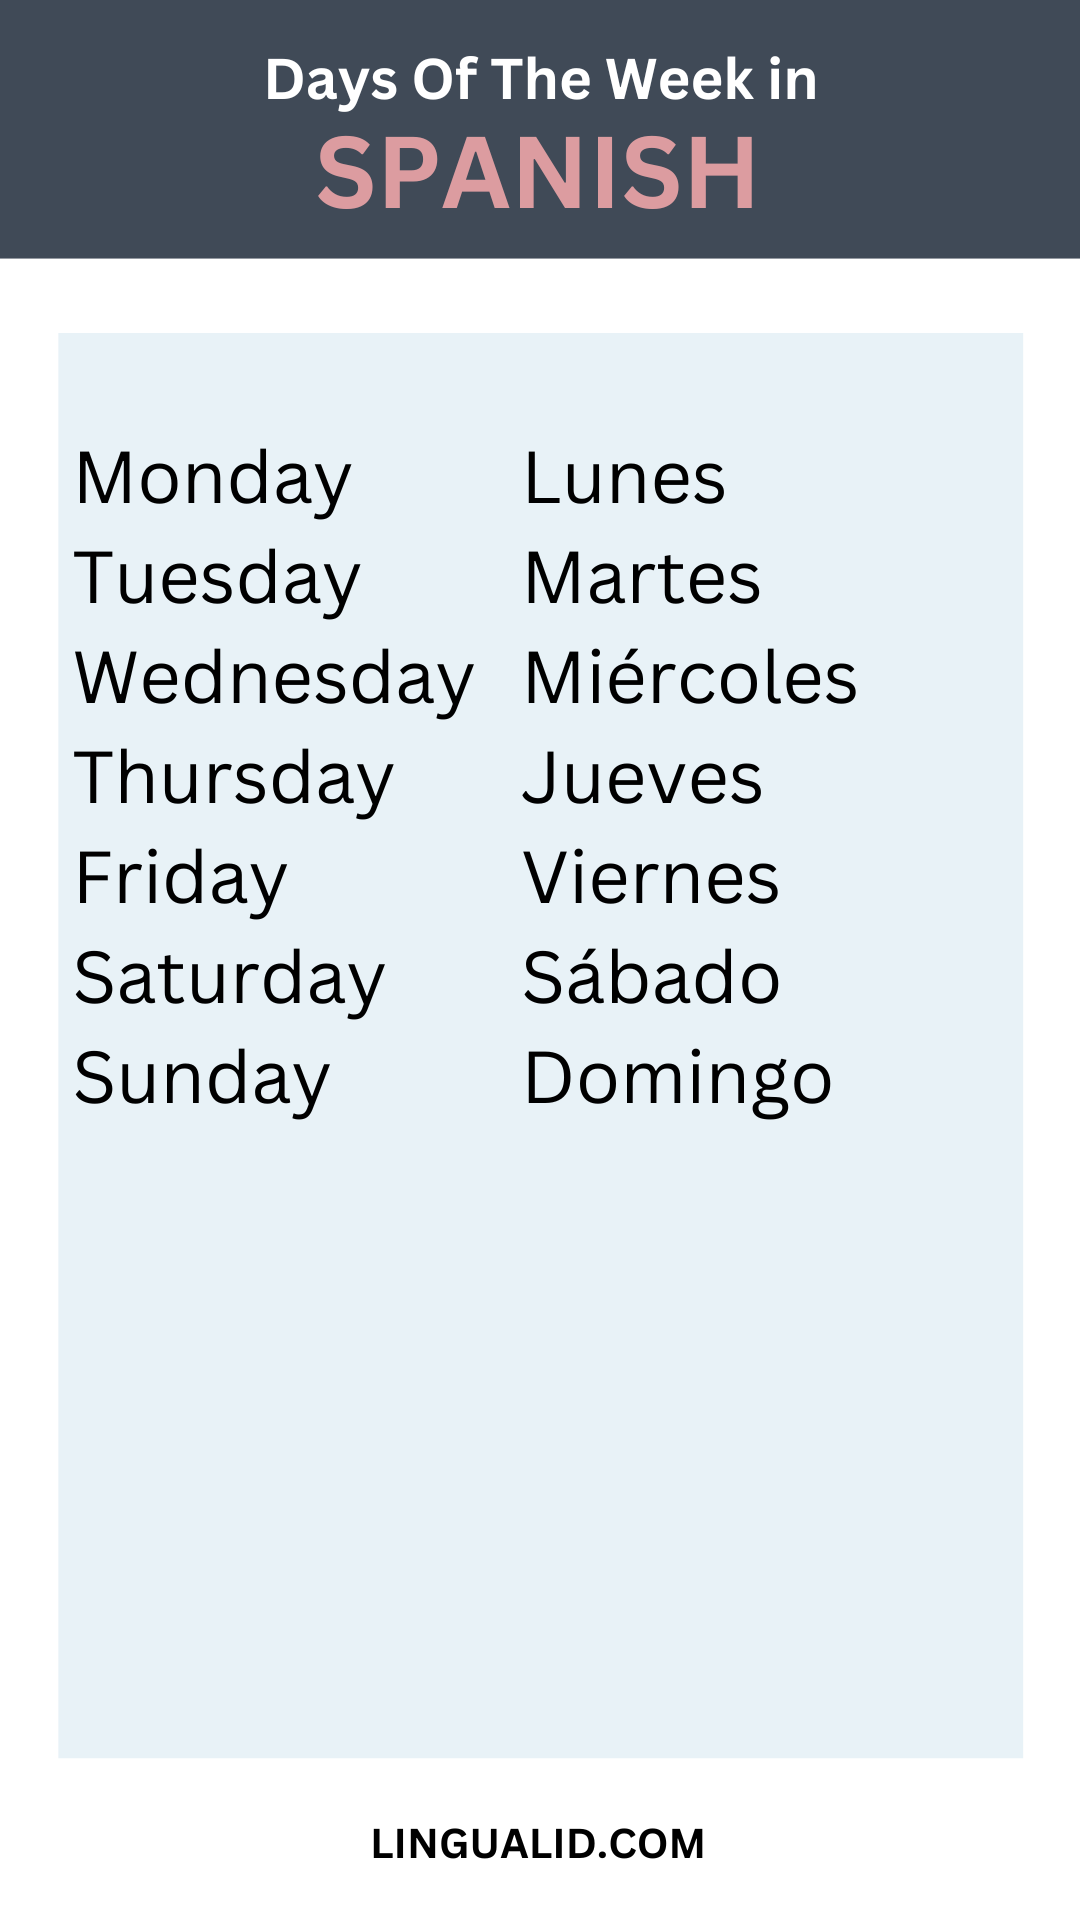 Days and Months in Spanish